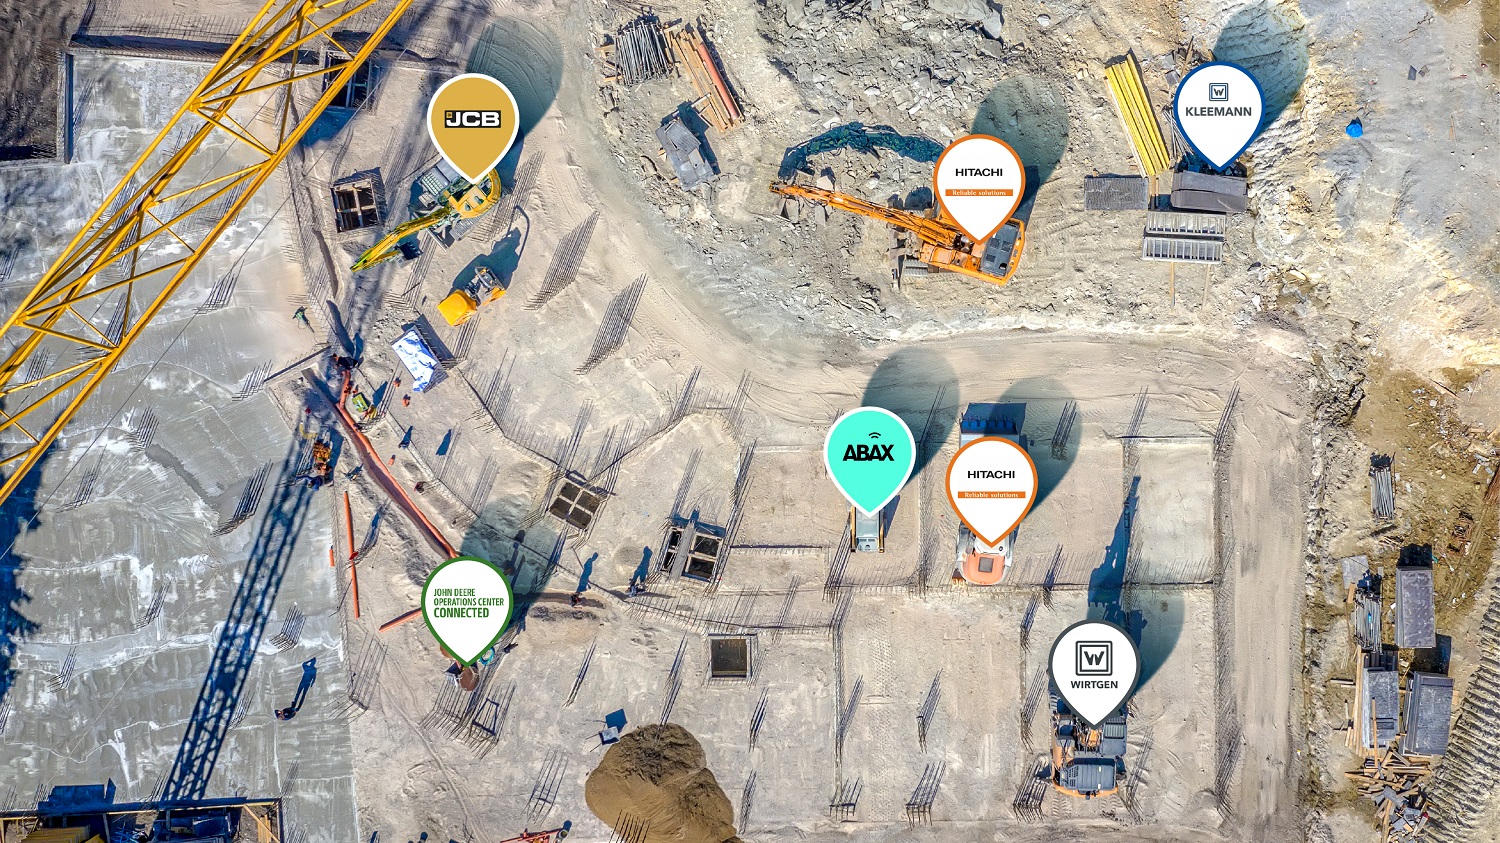 Site with labelled equipment